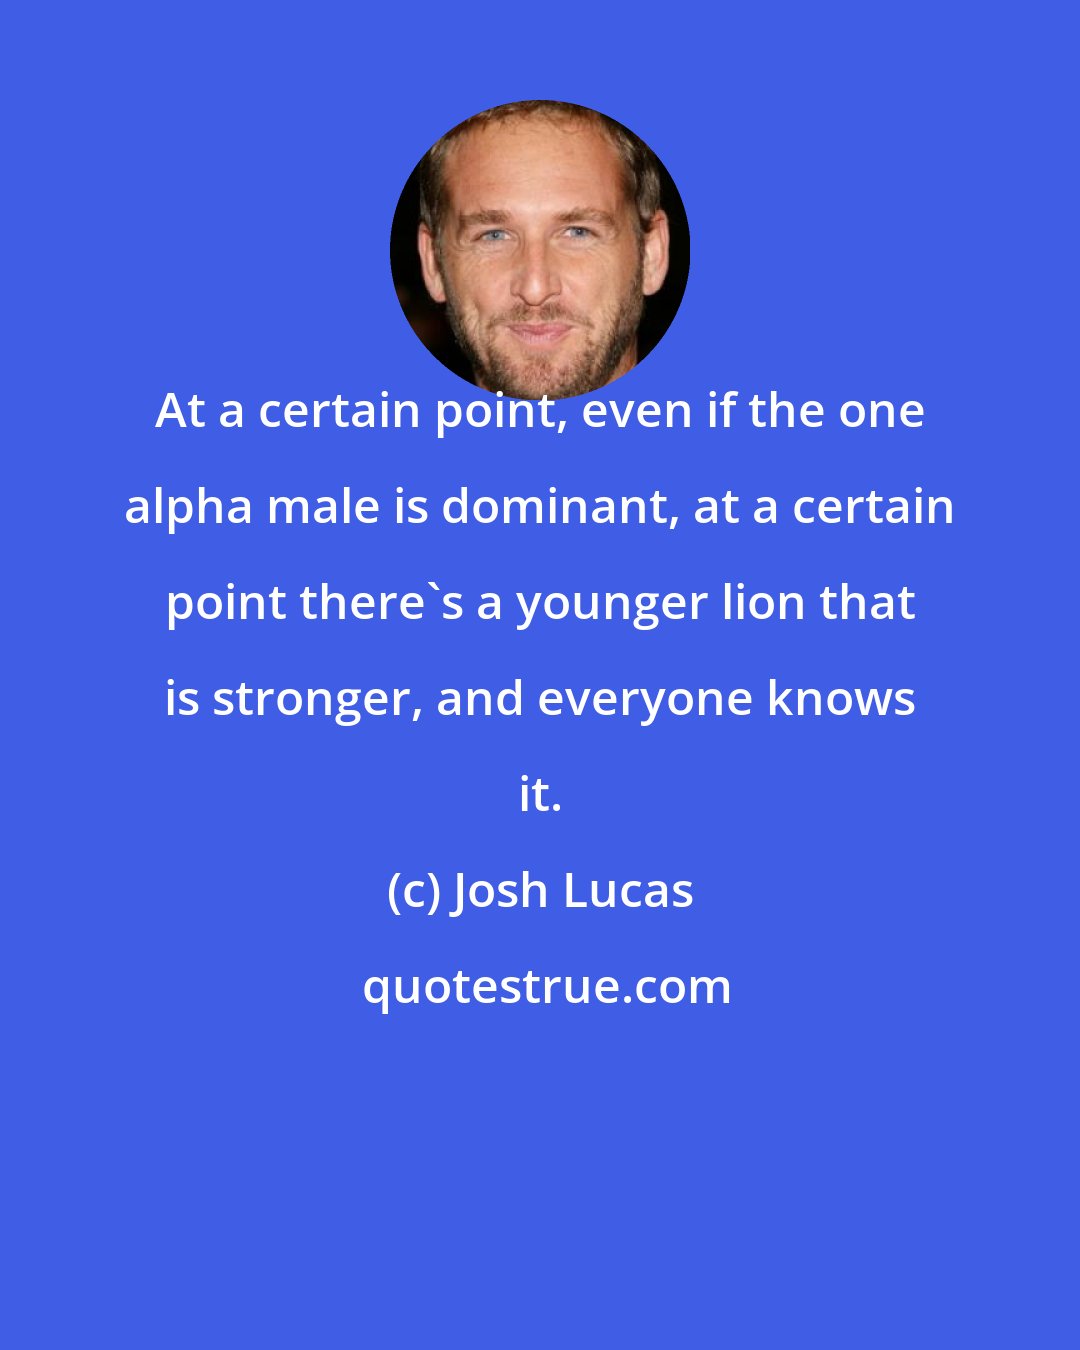 Josh Lucas: At a certain point, even if the one alpha male is dominant, at a certain point there's a younger lion that is stronger, and everyone knows it.